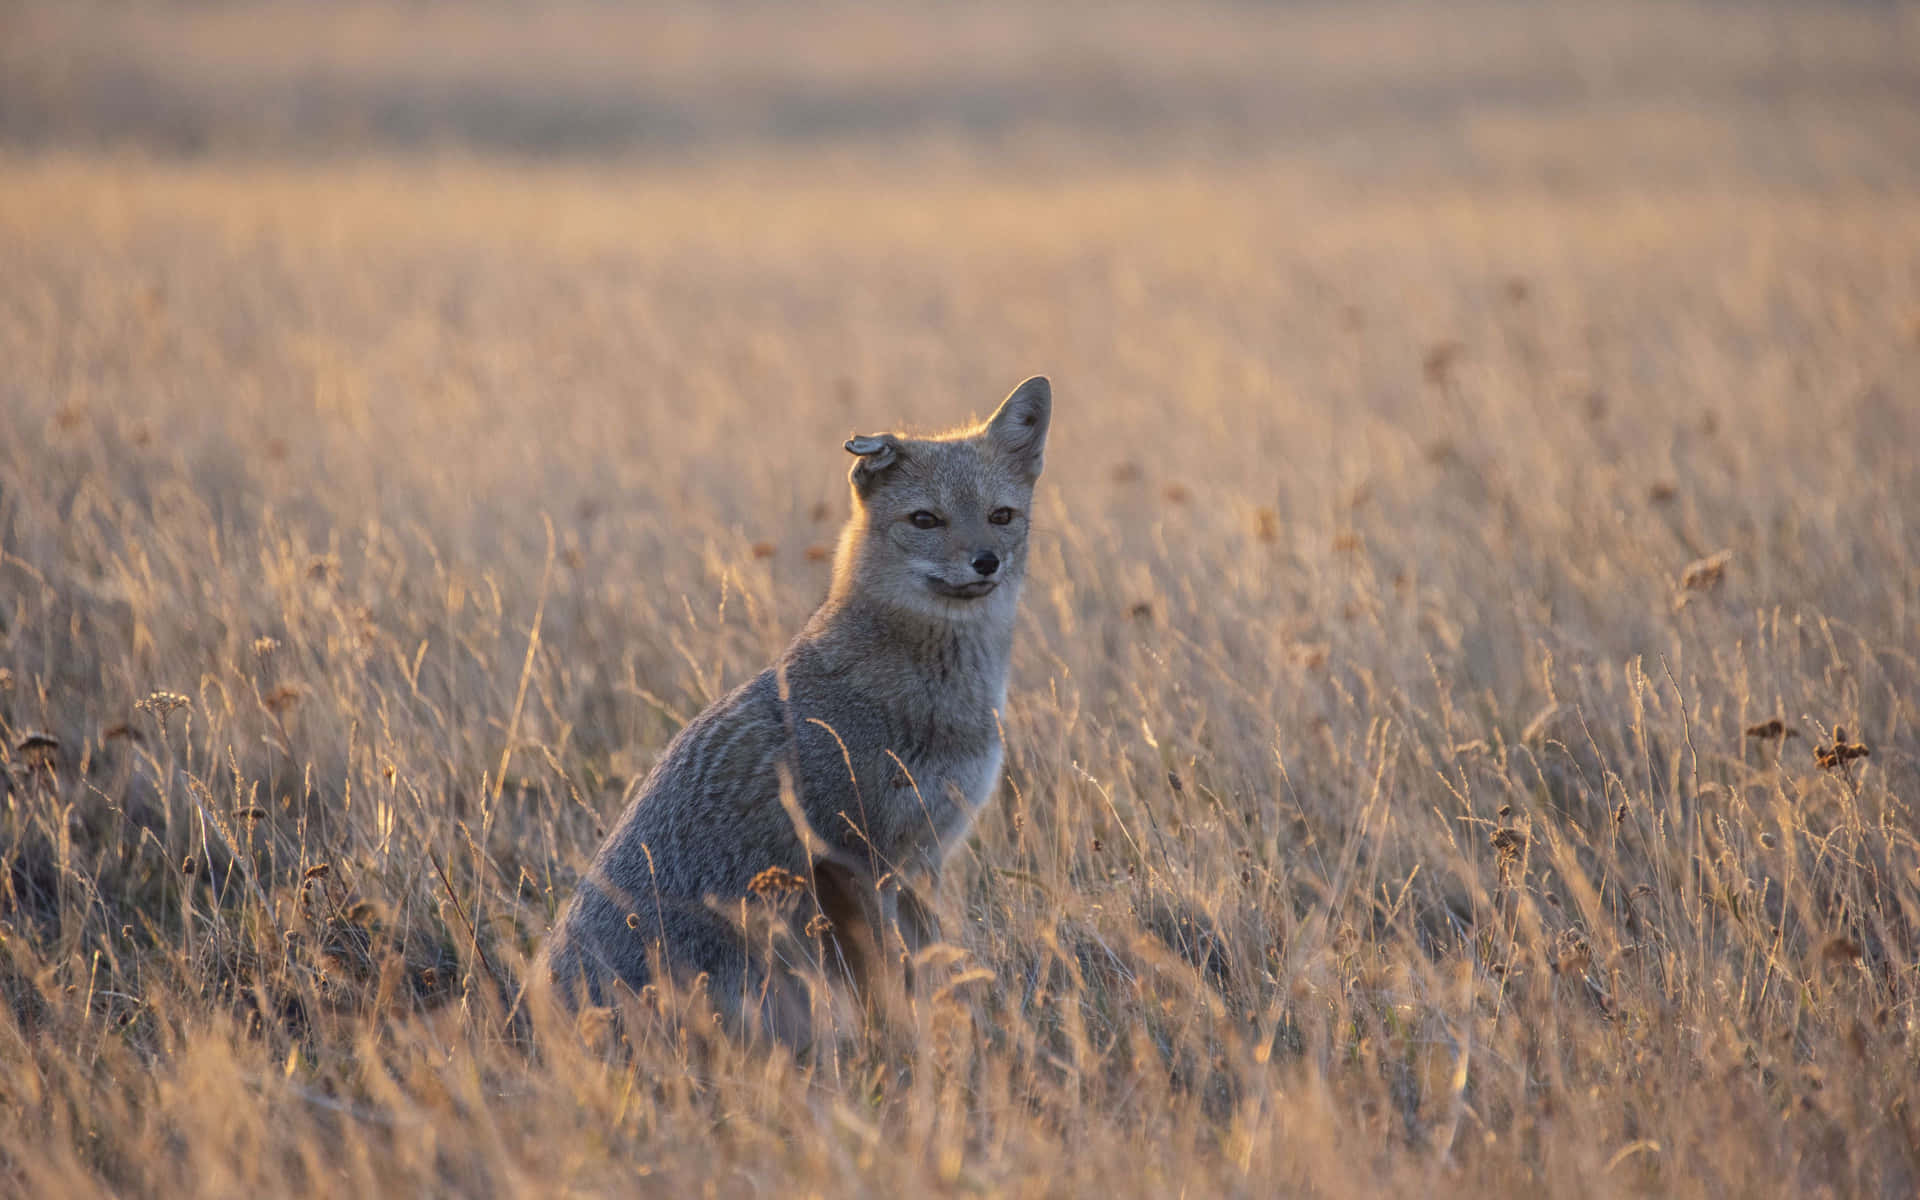 A gray fox sitting atop a rocky perch in its natural habitat.